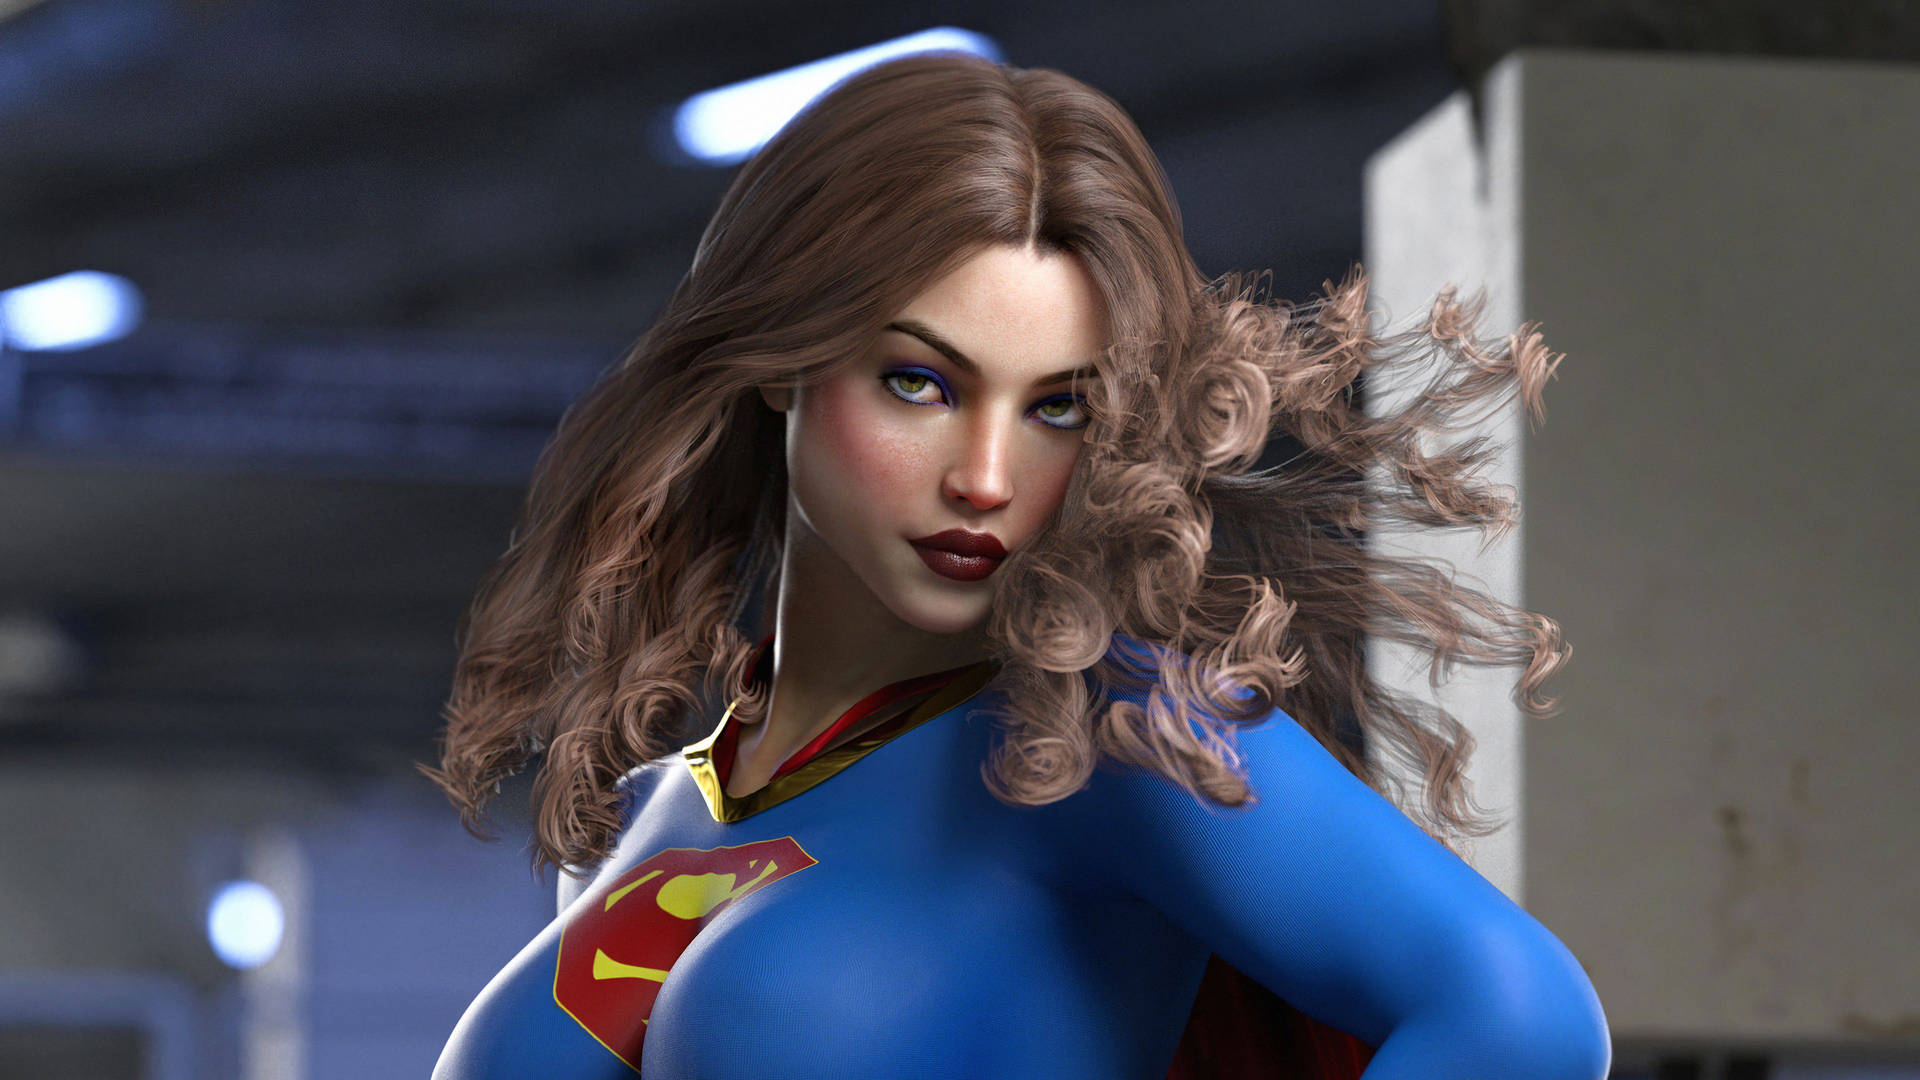 Superwoman With Curly Hair Wallpaper